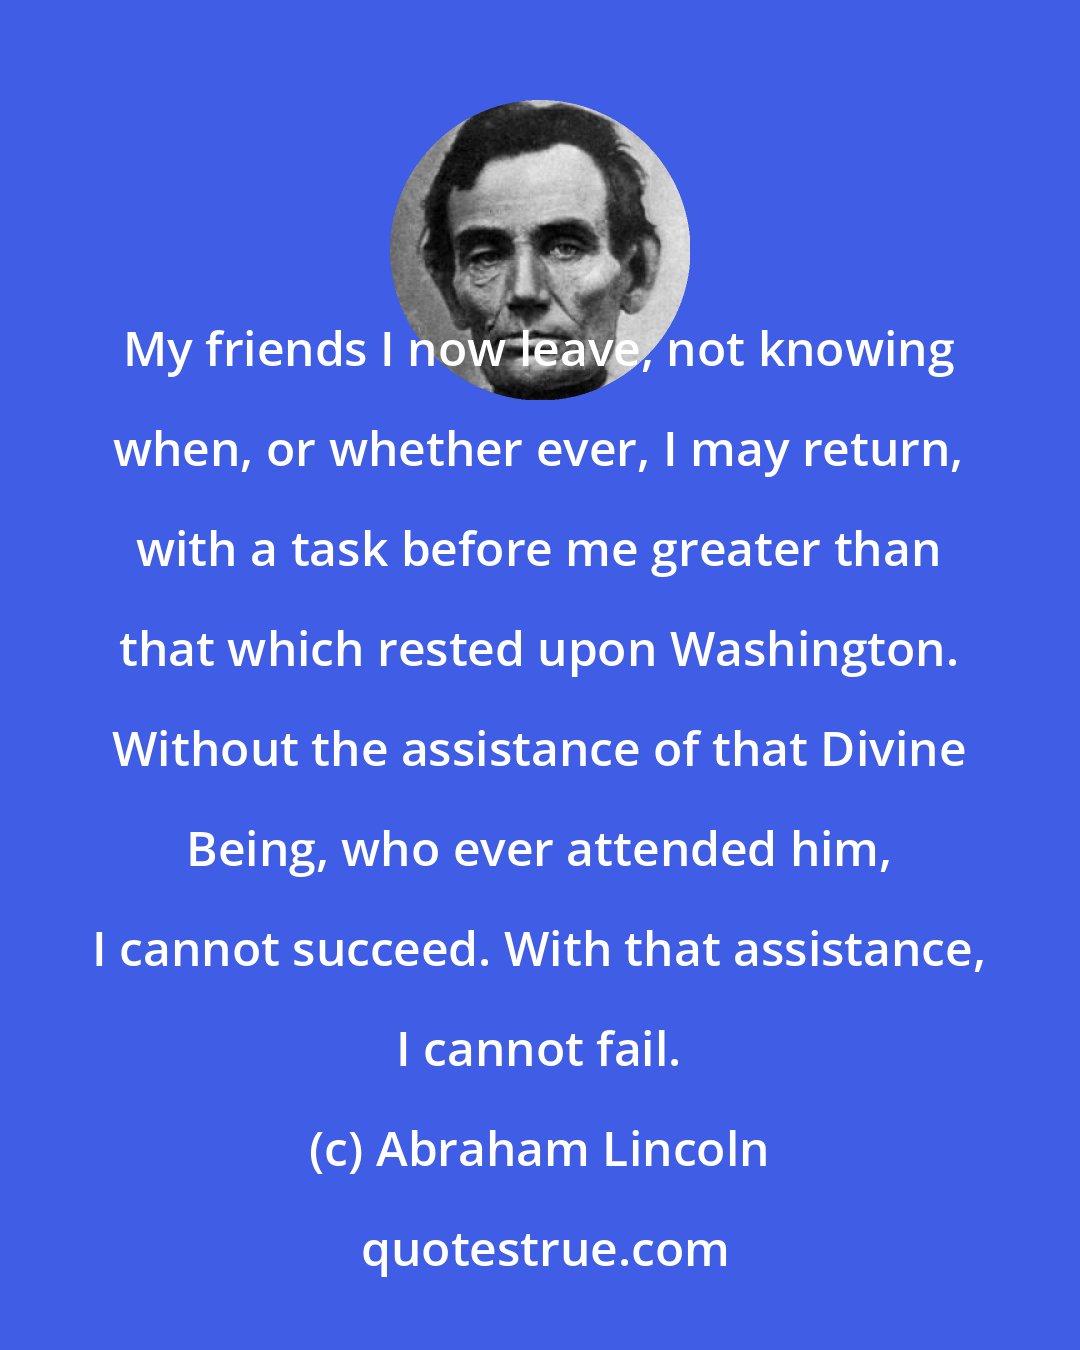 Abraham Lincoln: My friends I now leave, not knowing when, or whether ever, I may return, with a task before me greater than that which rested upon Washington. Without the assistance of that Divine Being, who ever attended him, I cannot succeed. With that assistance, I cannot fail.